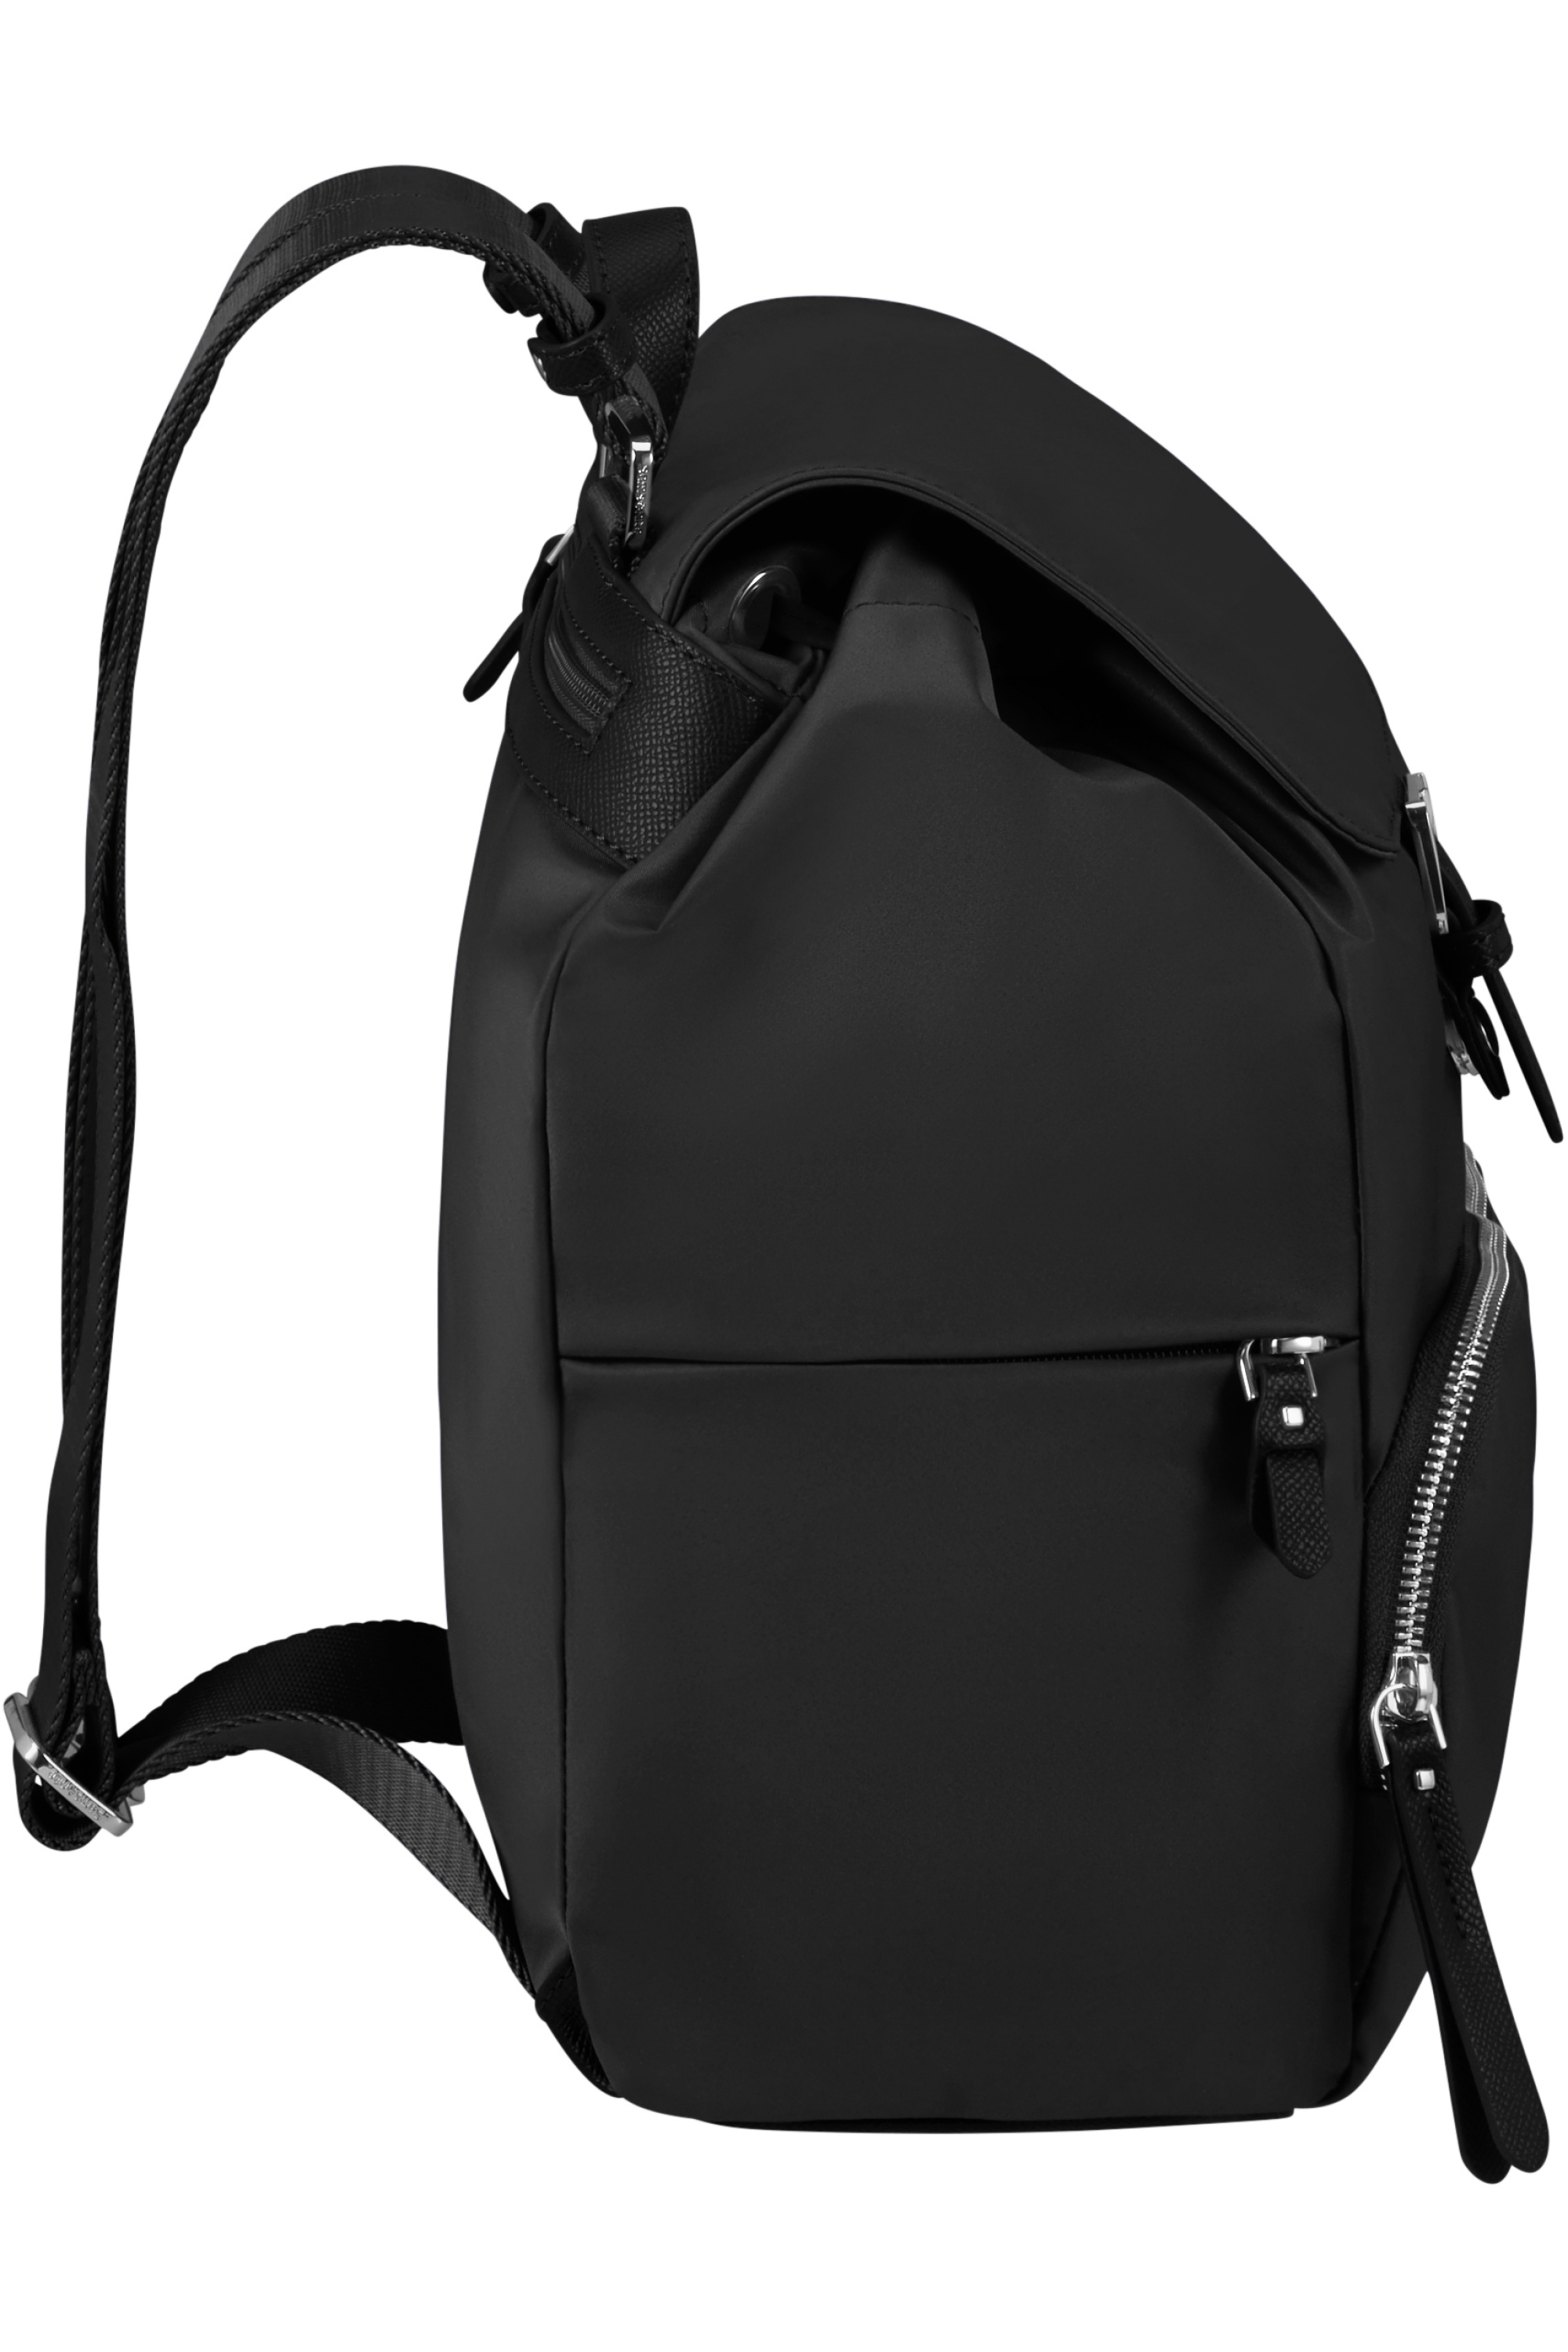 142800-1041-142800_1041_essentially_karissa_backpack_3pkt_1_buckle_side-6723bb0f-7730-4d8d-8eb1-ae3f00a6593d-png